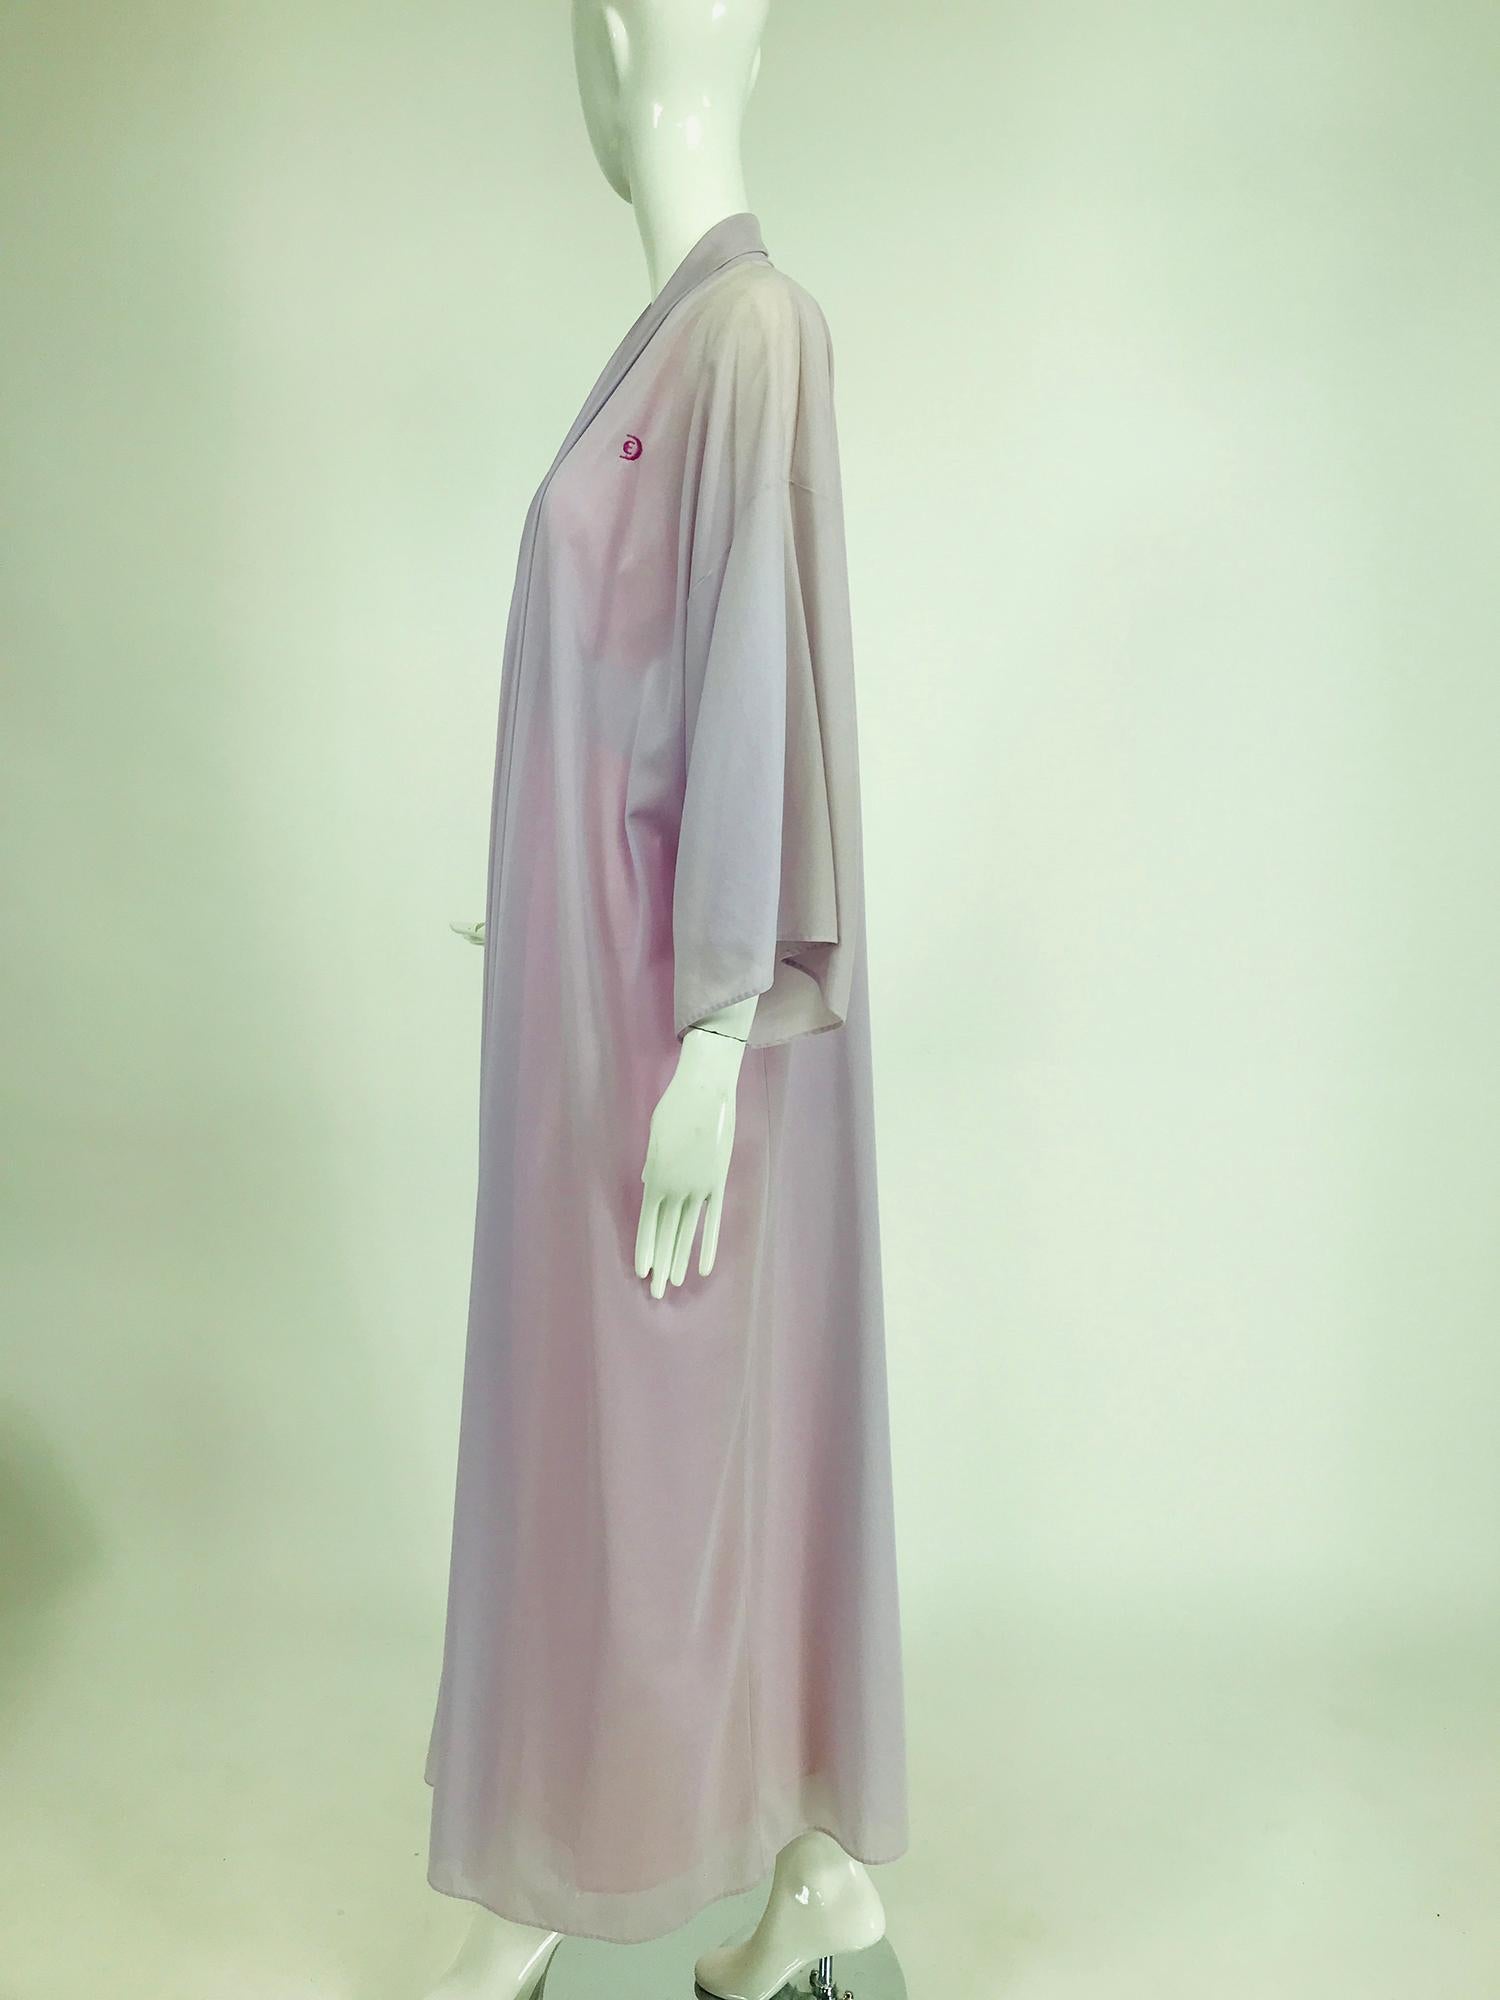 Emilio Pucci for Formfit Rogers 2pc. Sheer Peignoir Robe & Gown 1970s 1